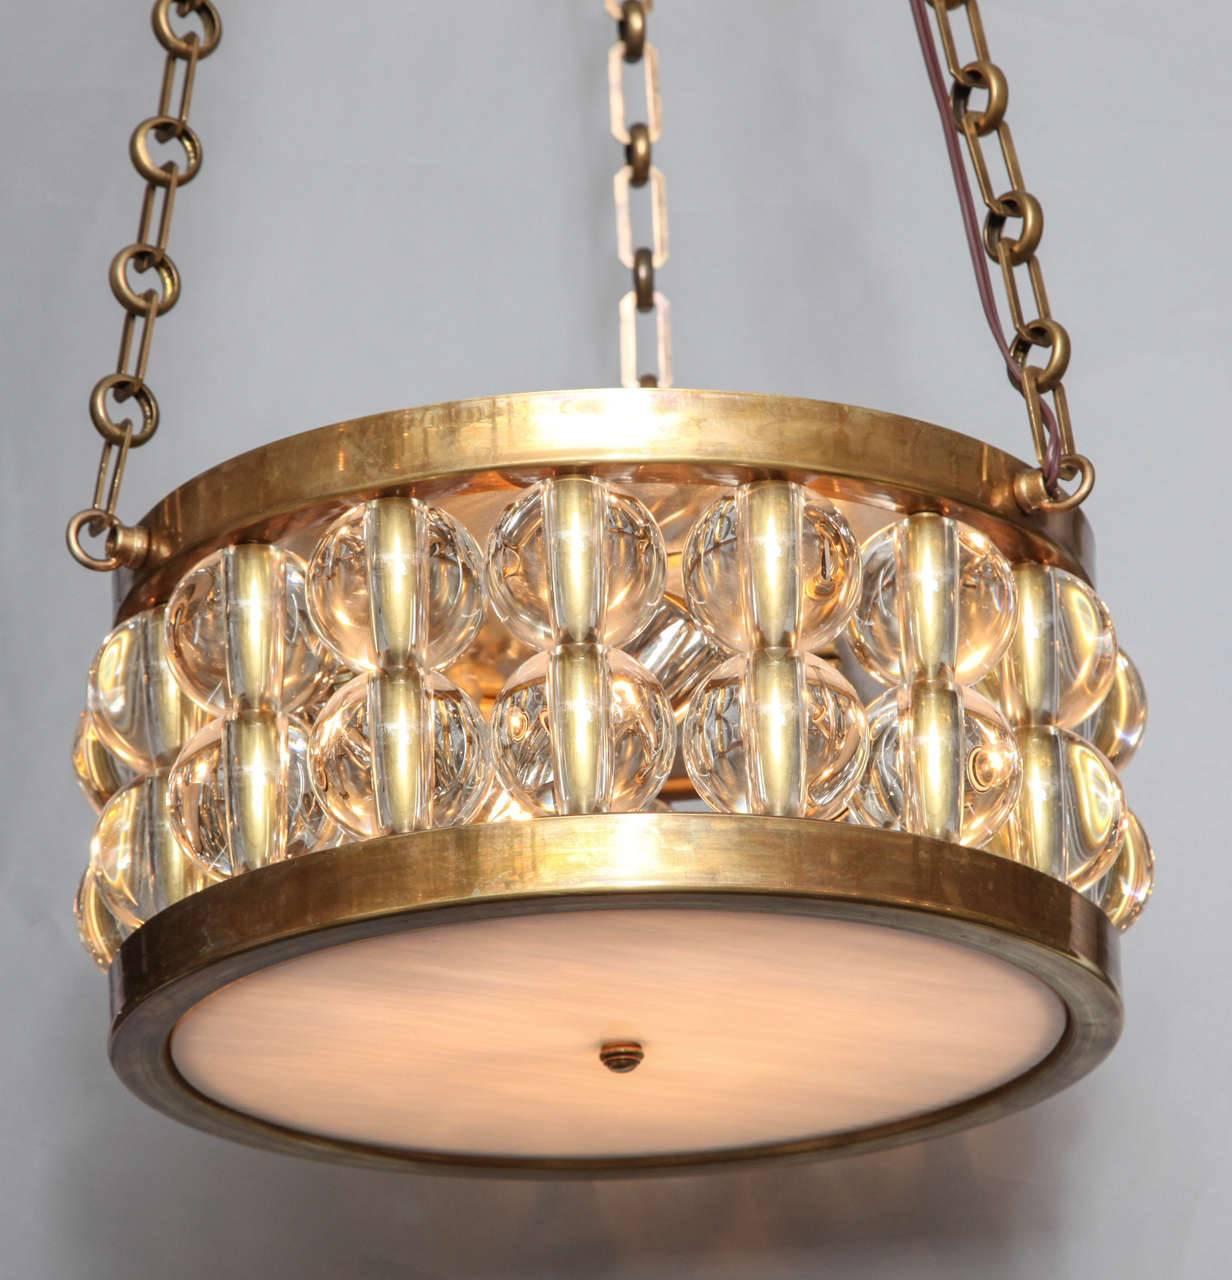 Art Deco Two-Tiered Tambour Pendant Light With Chain by David Duncan